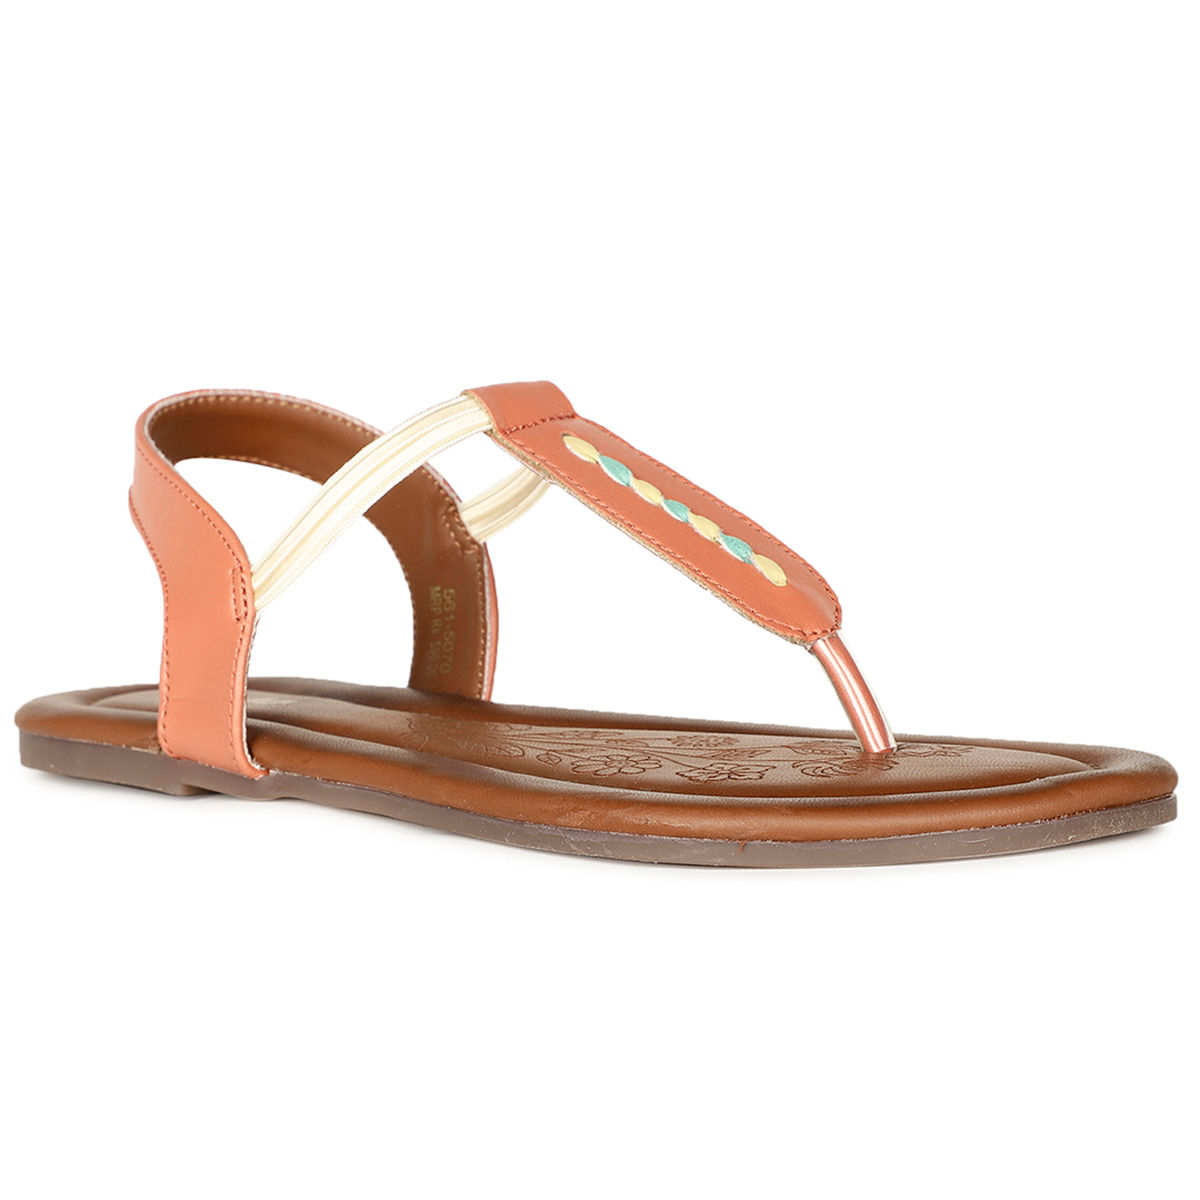 Buy Scholl by Bata Black Thong Sandals for Women at Best Price @ Tata CLiQ